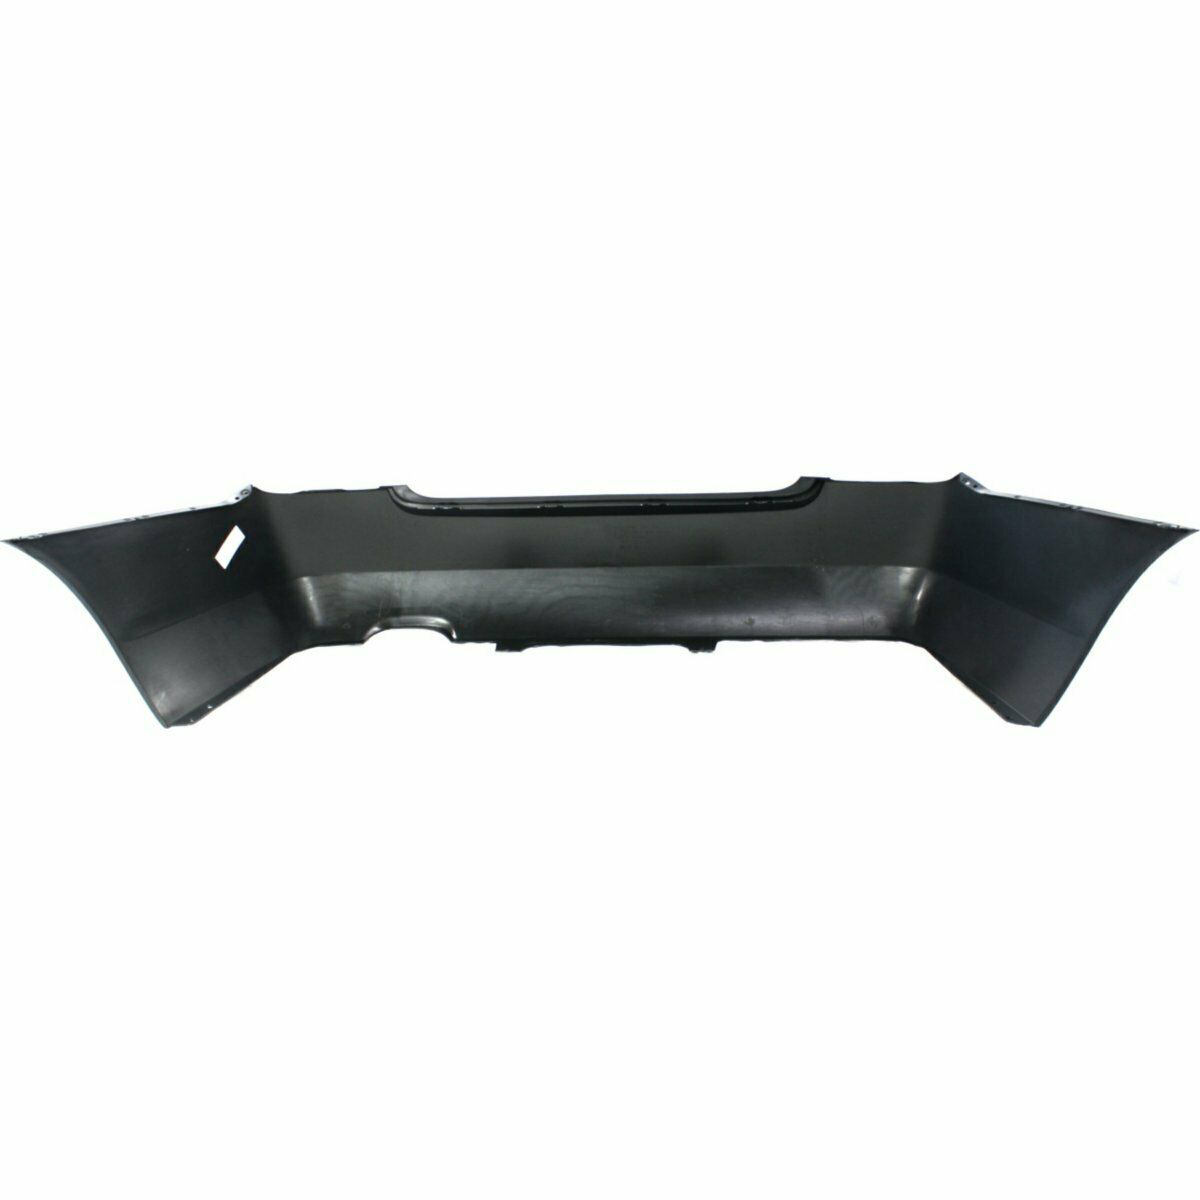 2002-2006 Nissan Altima 2.5L Rear Bumper Painted to Match